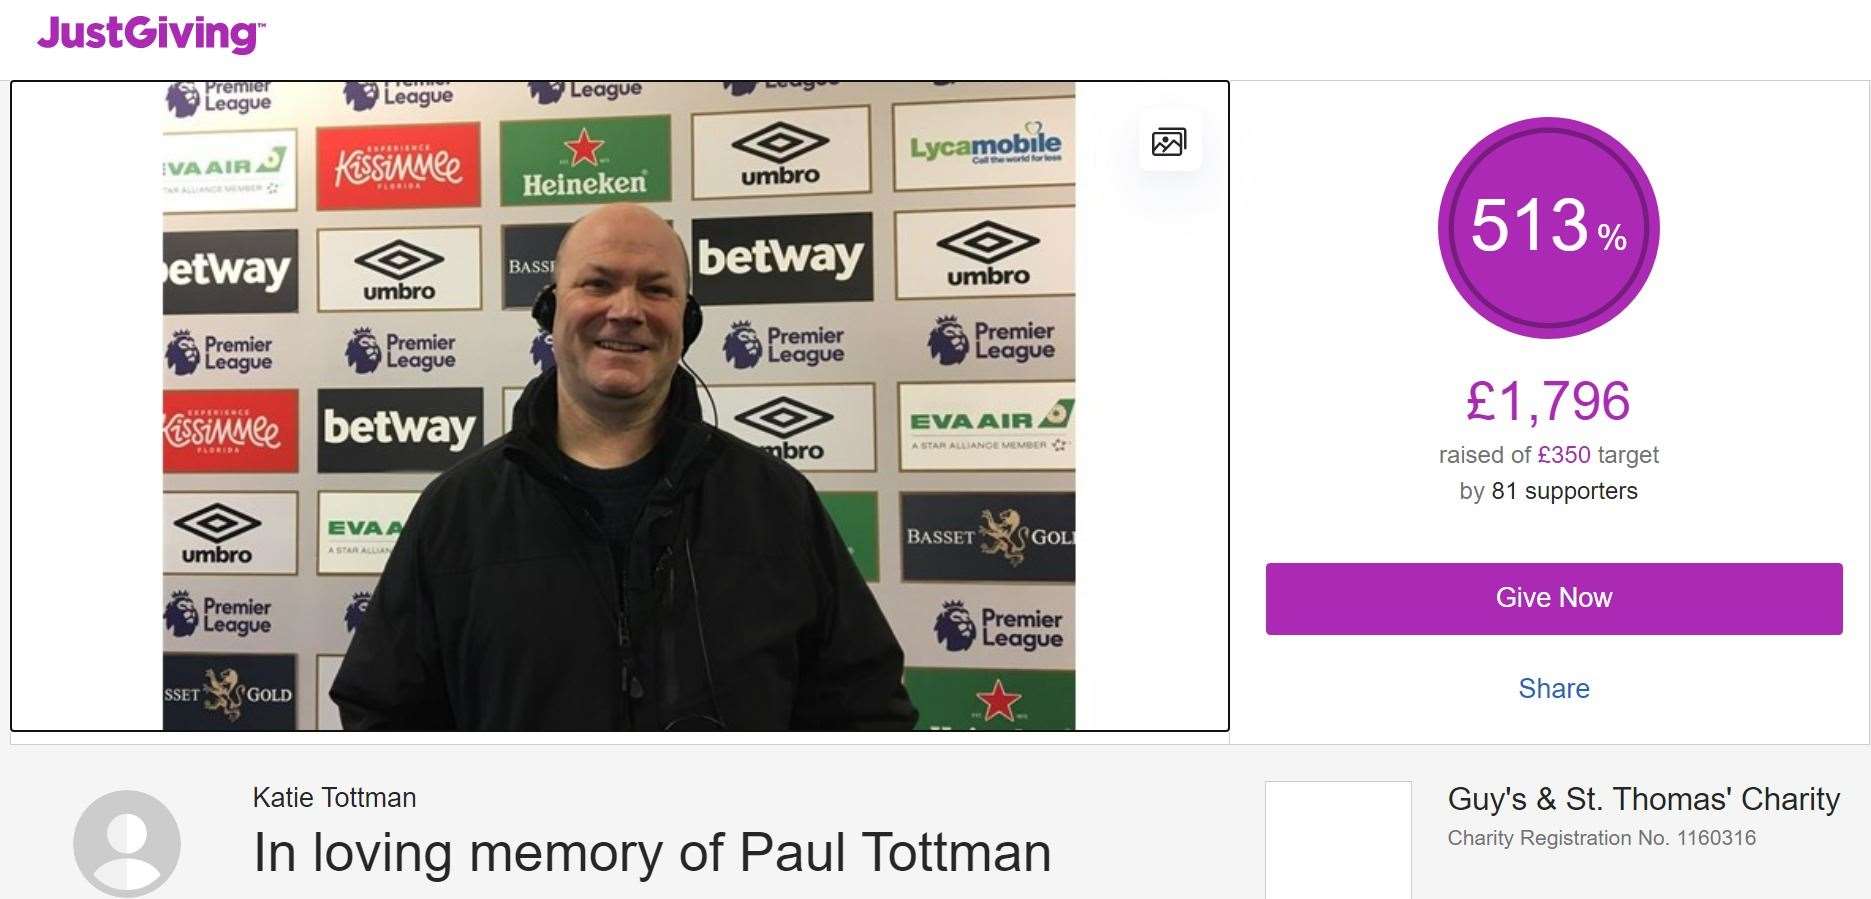 Paul Tottman's family set up a fundraising page in his memory